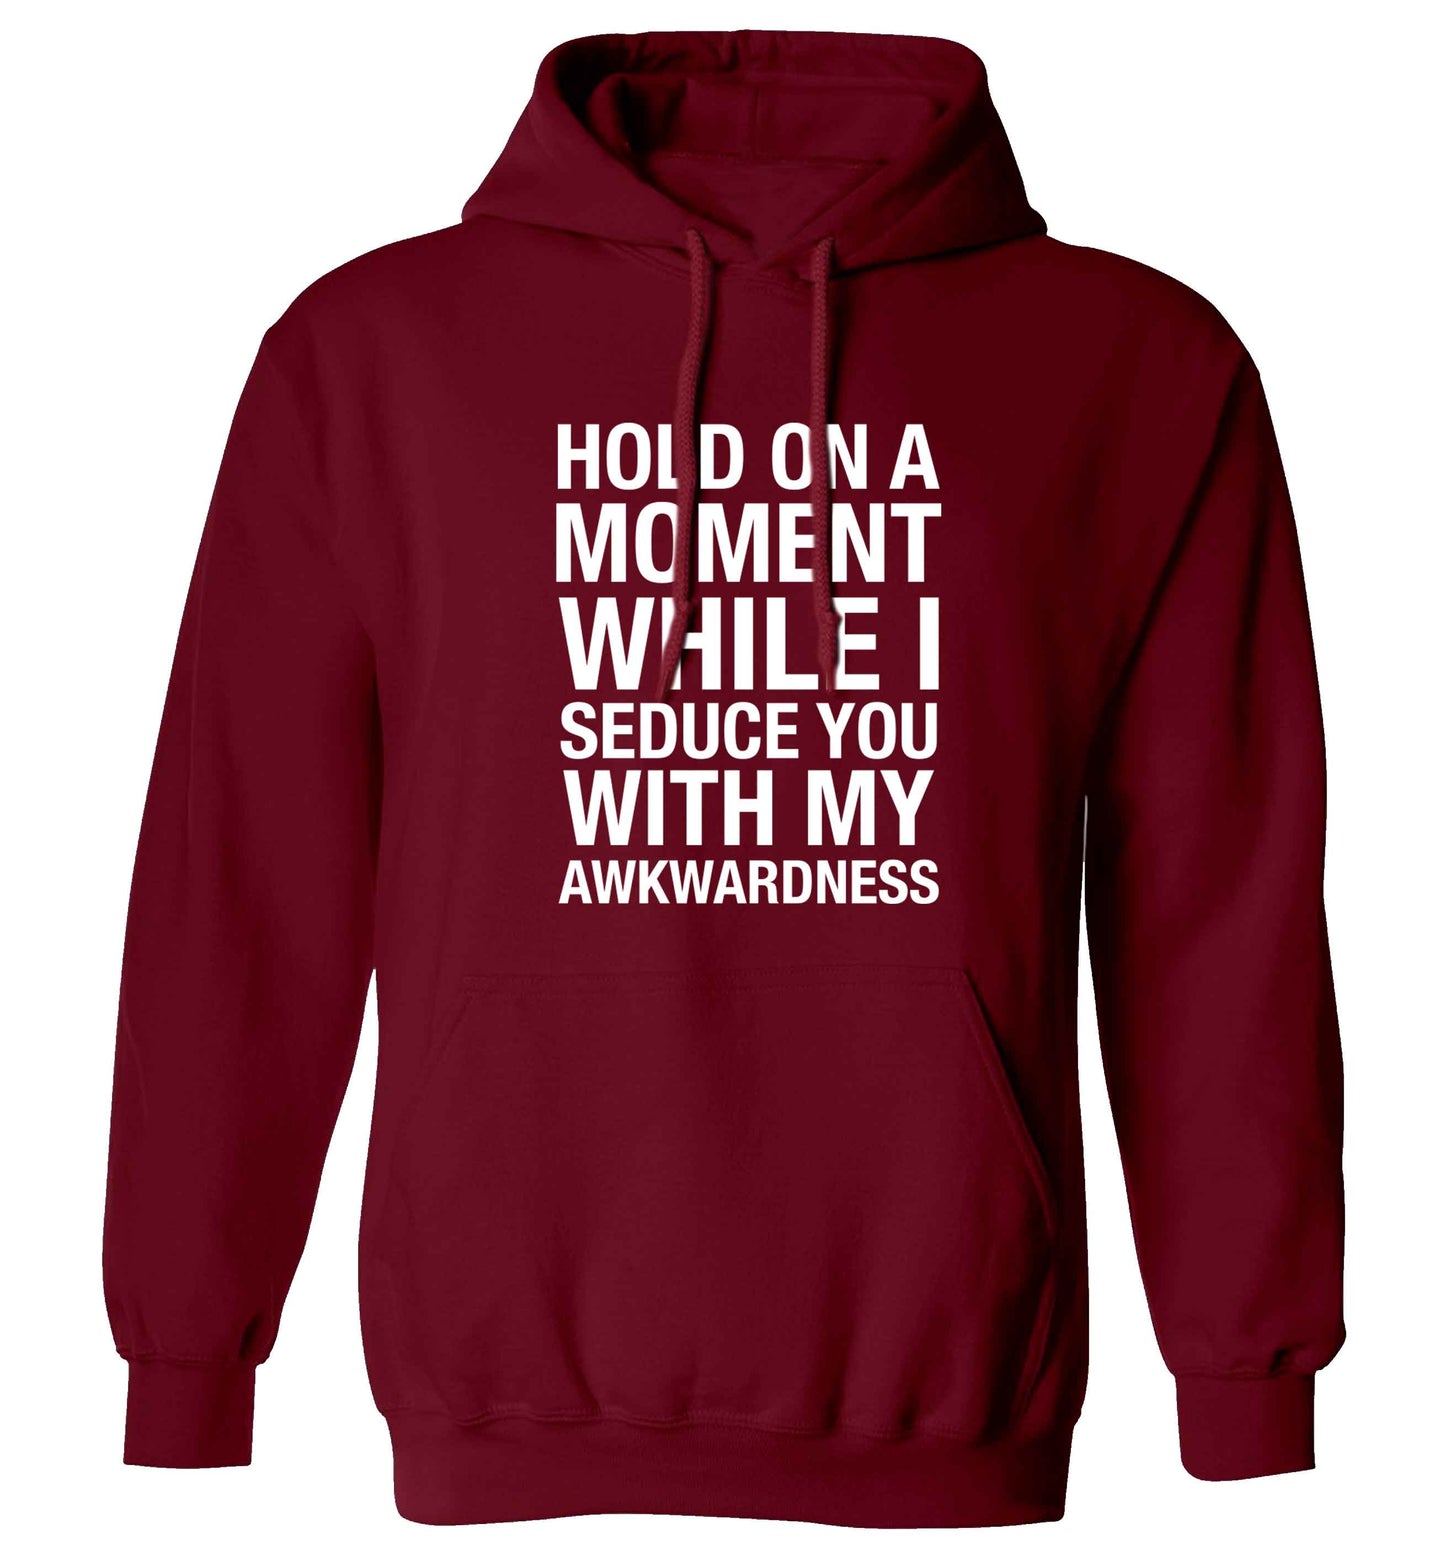 Hold on a moment while I seduce you with my awkwardness adults unisex maroon hoodie 2XL